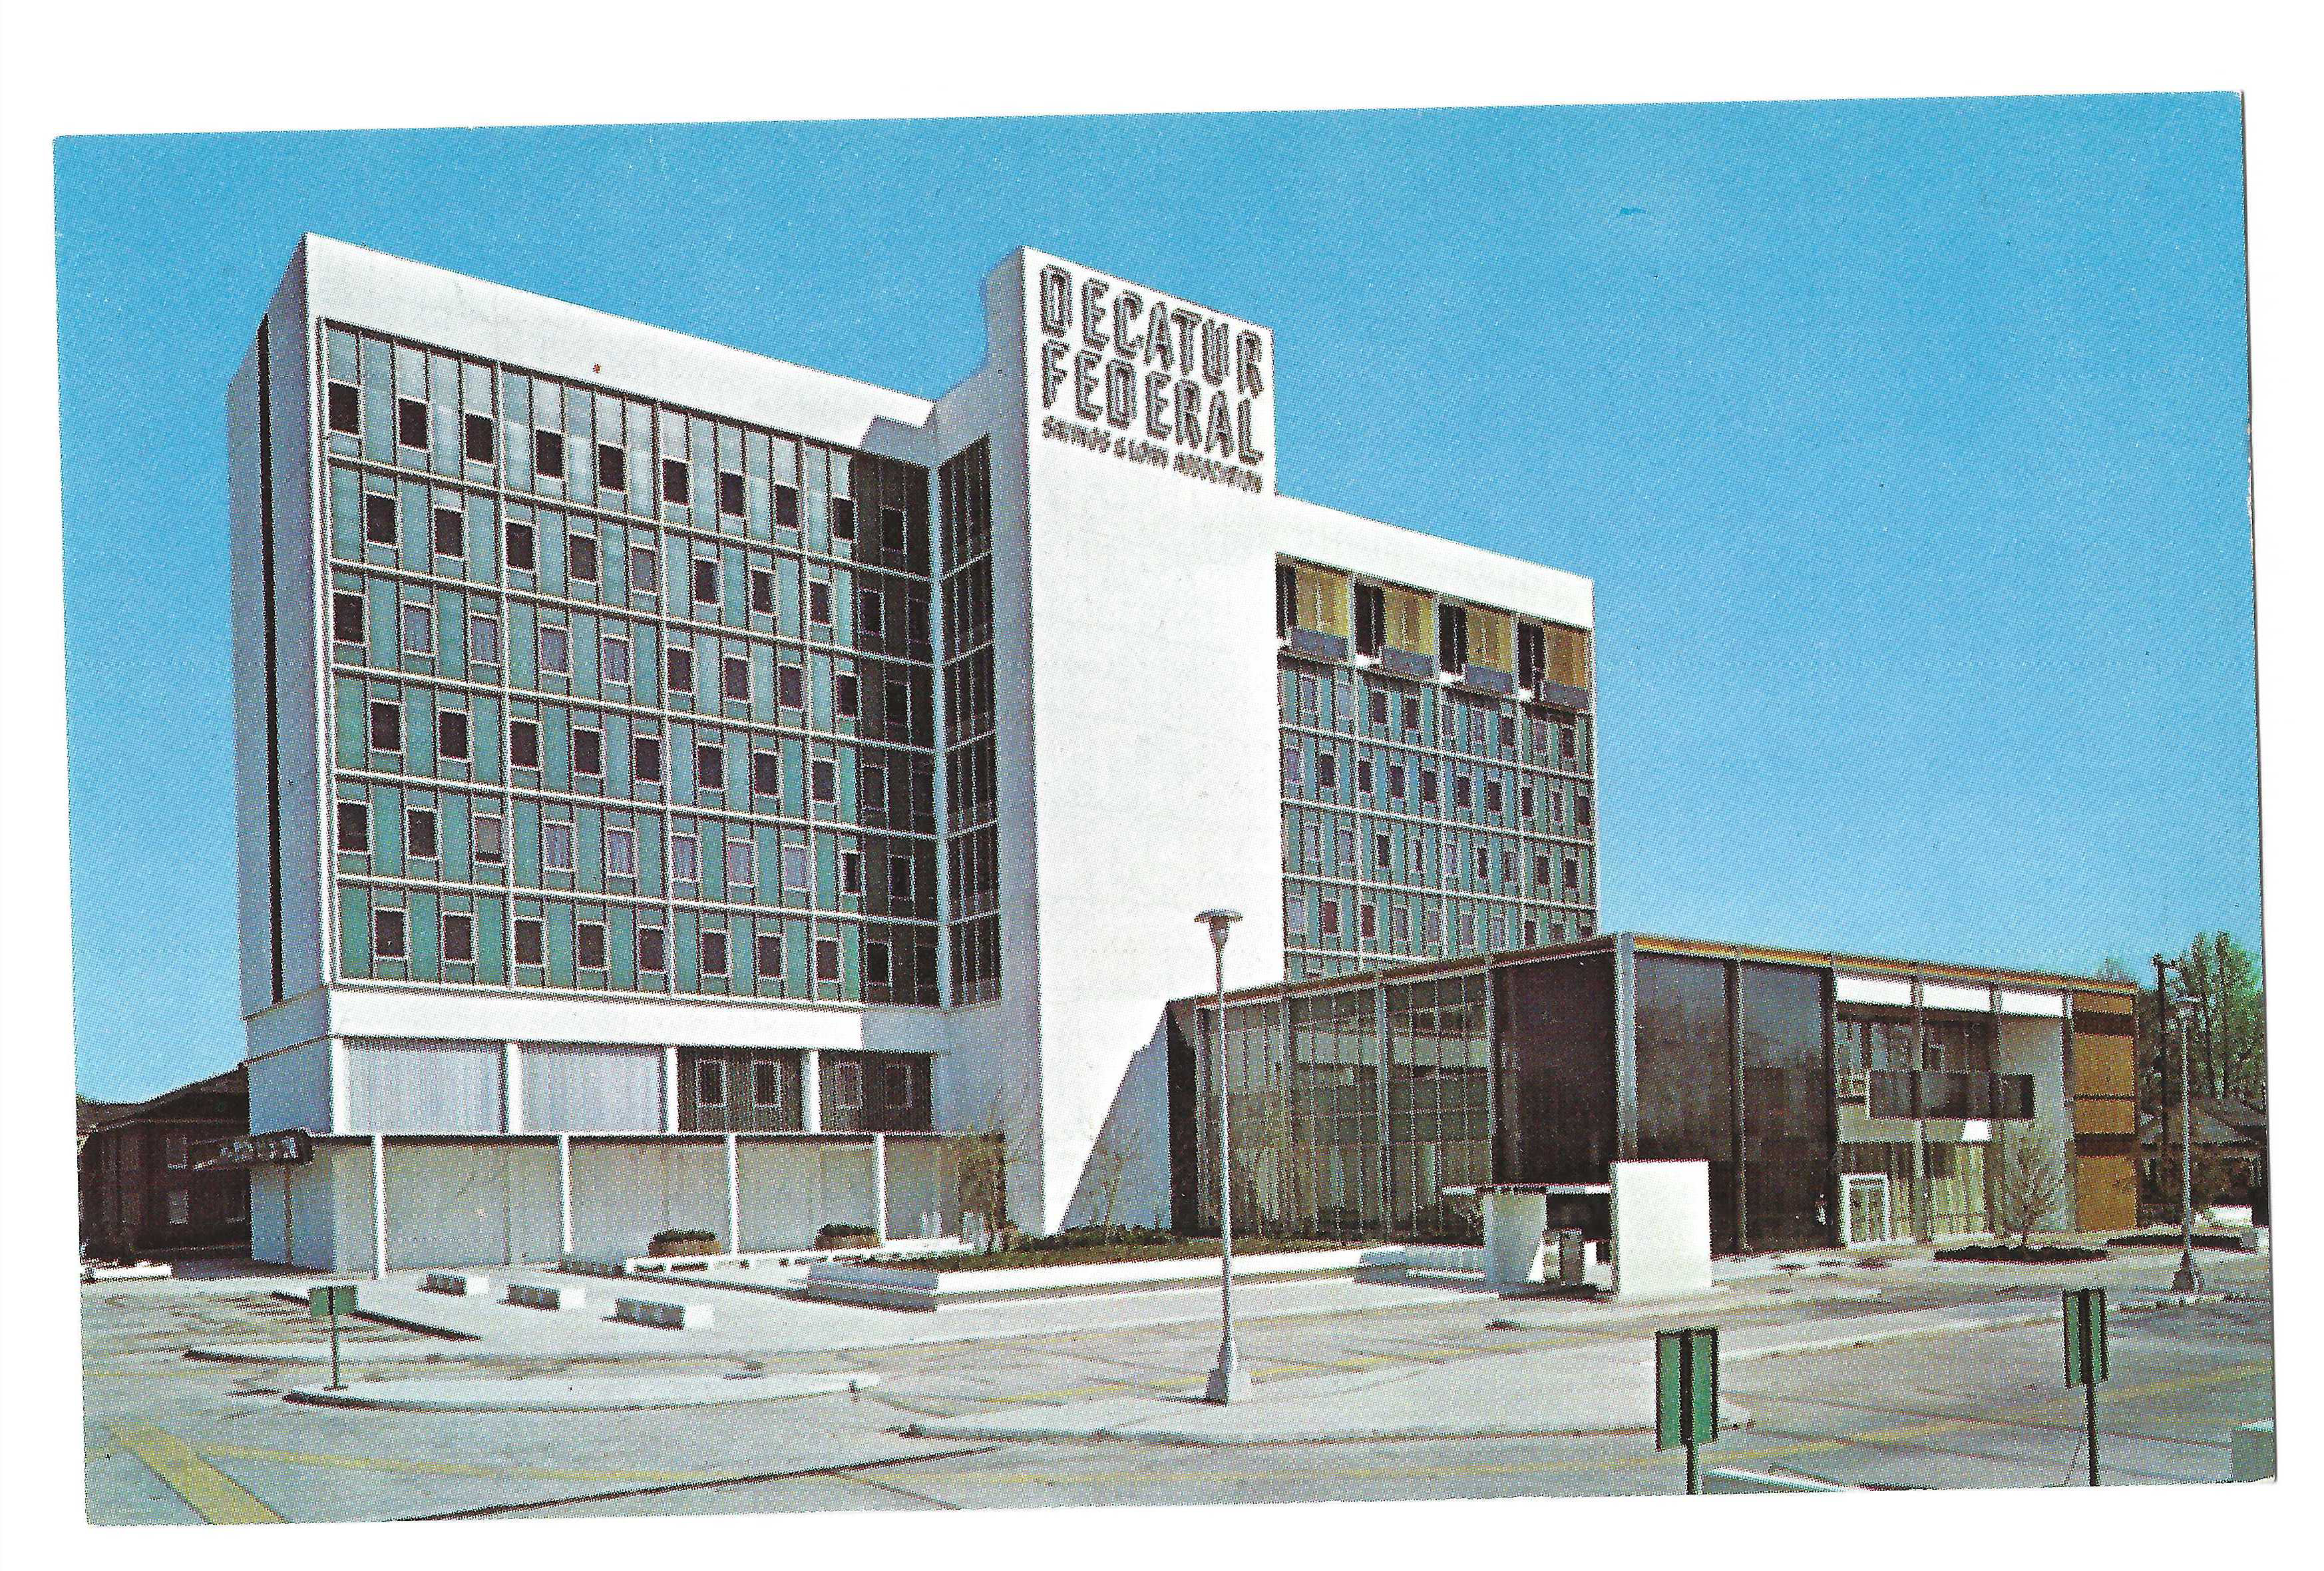 an old postcard showing the Decatur Federal bank building